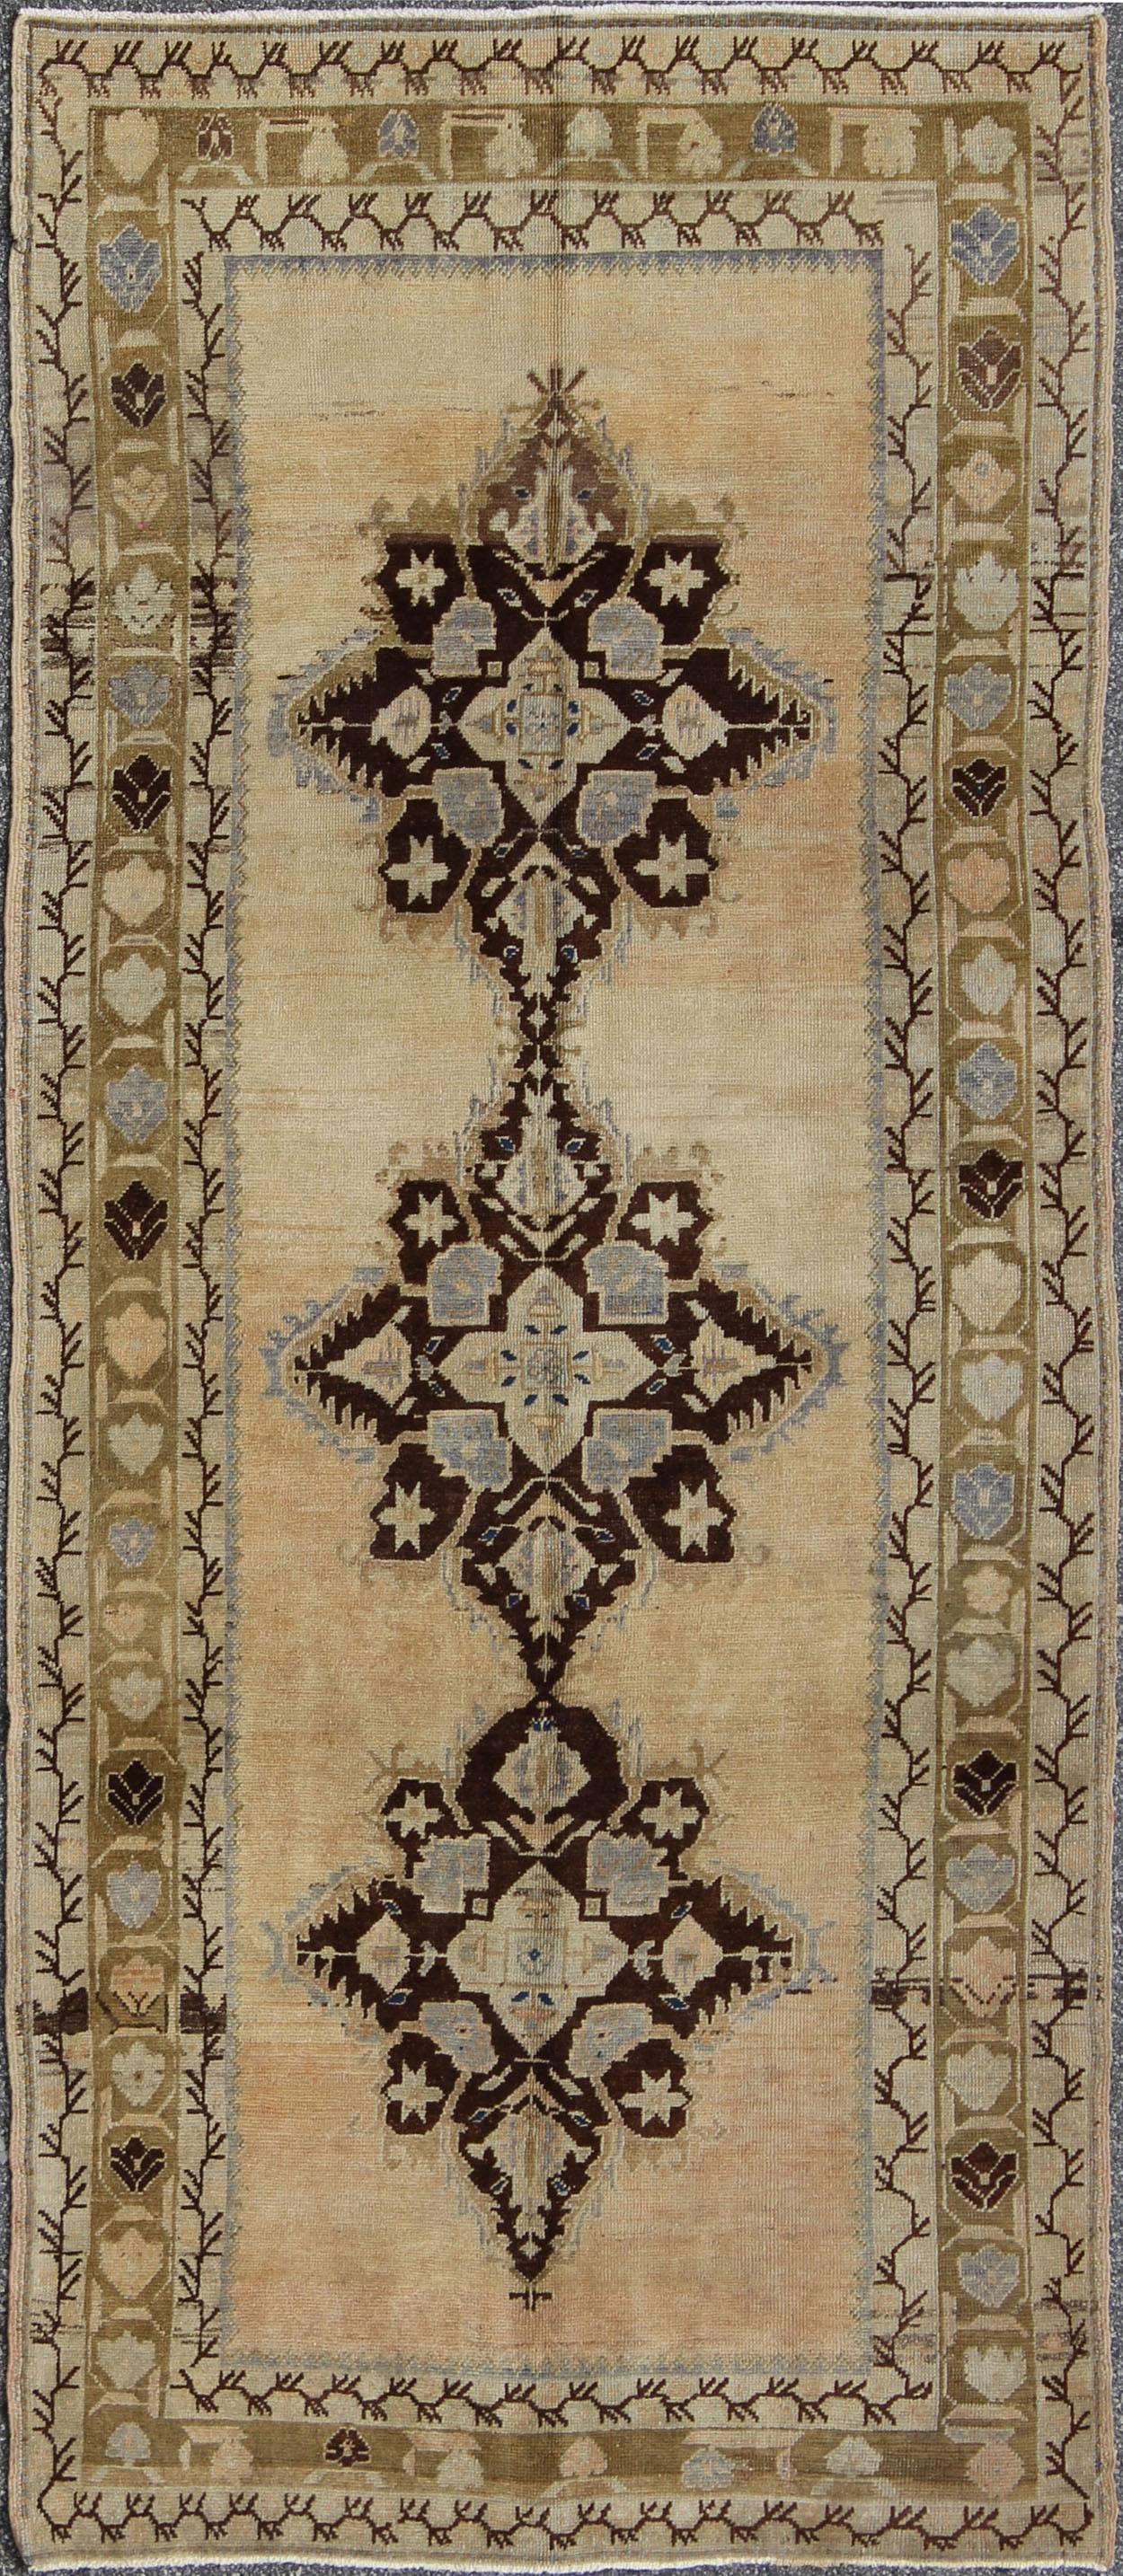 Vintage Turkish Oushak runner with starburst medallion in green, brown and beige. Rug/EN-92278, Vintage Runner, Vintage Turkish Runner
This beautiful antique Turkish rug was woven during the early part of the 20th century and displays a stunning